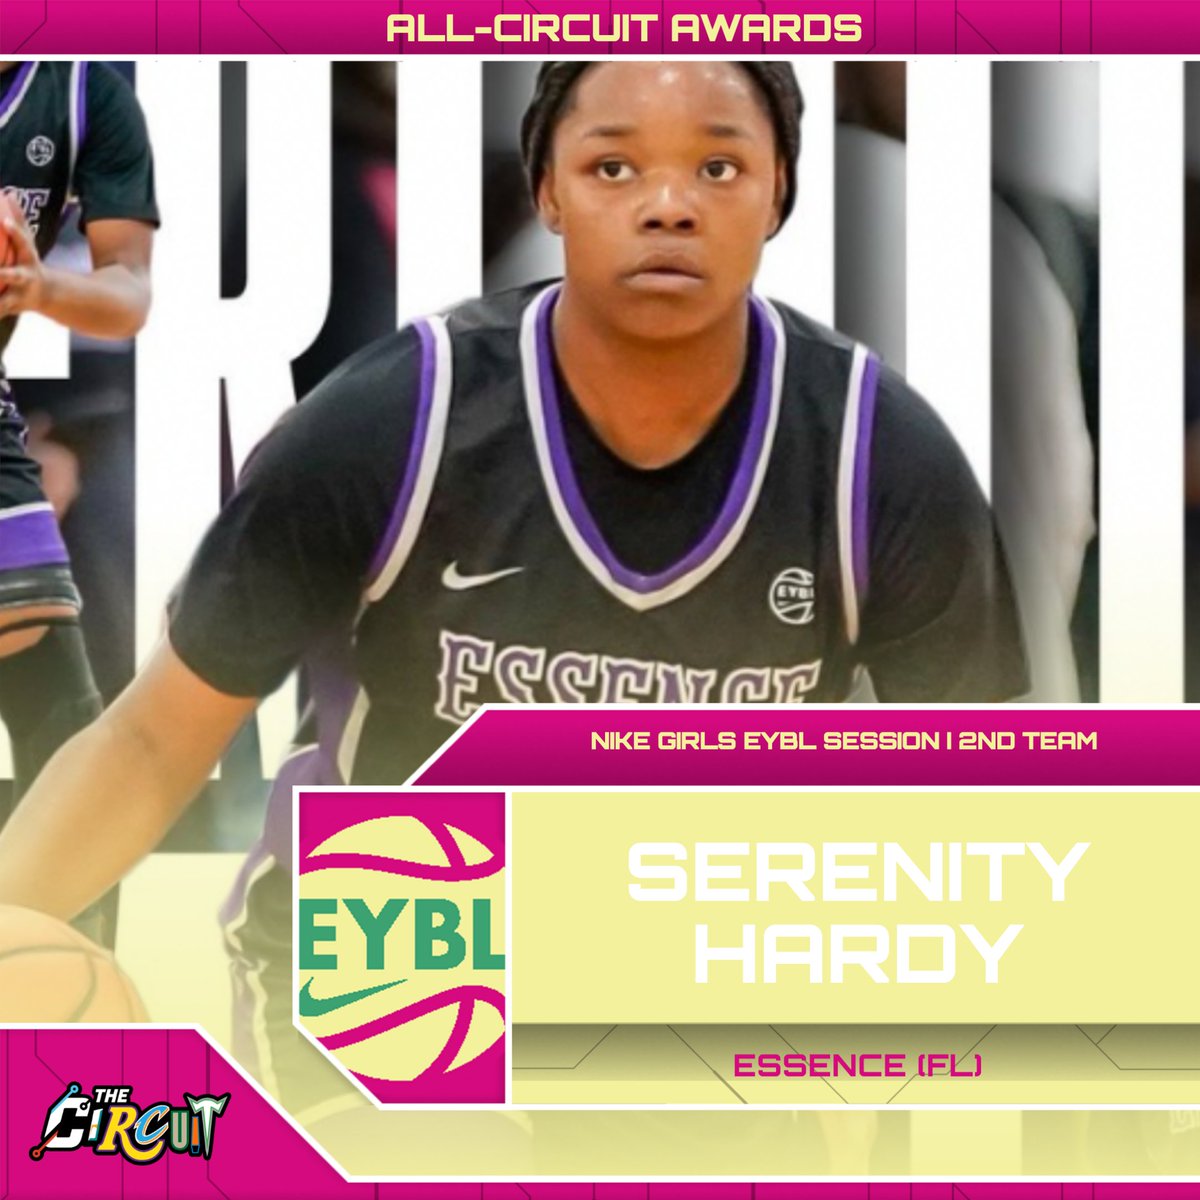 Nike EYBL Hampton | 2nd Team 🥈 Serenity Hardy | Essence (FL) | 2026 Averages ➡️ 14.6 PPG, 3.2 RPG, 1.4 APG, 1.6 SPG All-Circuit Awards ⤵️ thecircuithoops.com/news_article/s…